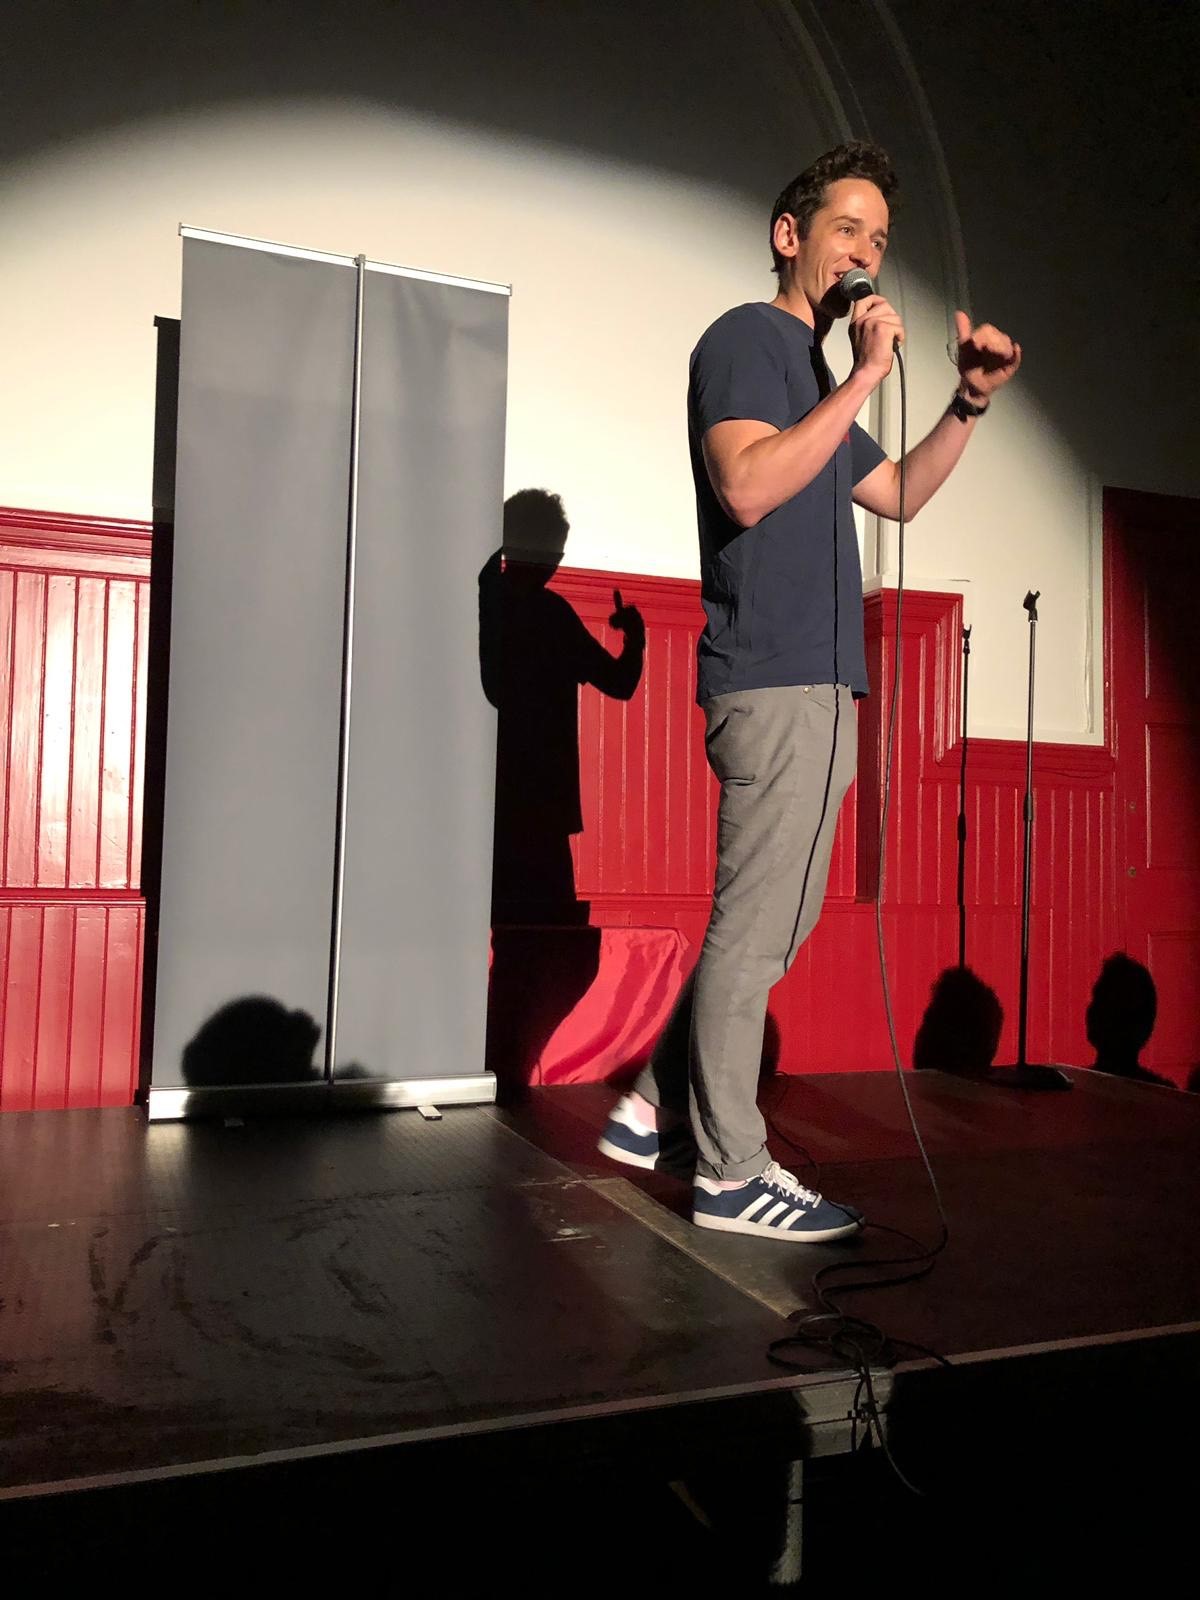 Comedian Milo Edwards, who has been performing his show at the Edinburgh Festival Fringe this year